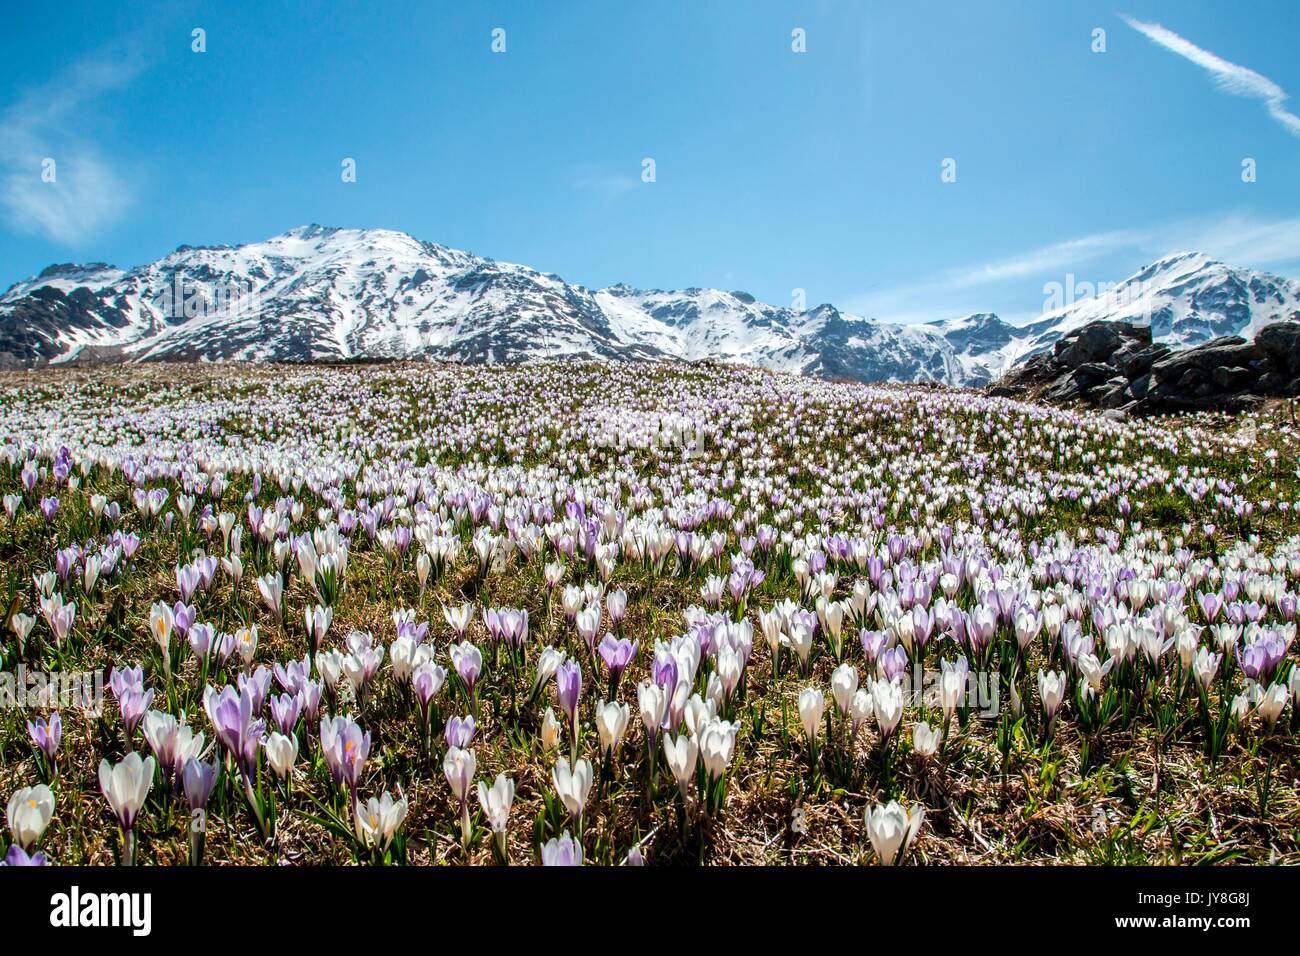 A meadow covered with crocus in Andossi, snow-capped peaks in the background - Valchiavenna, Italy Stock Photo